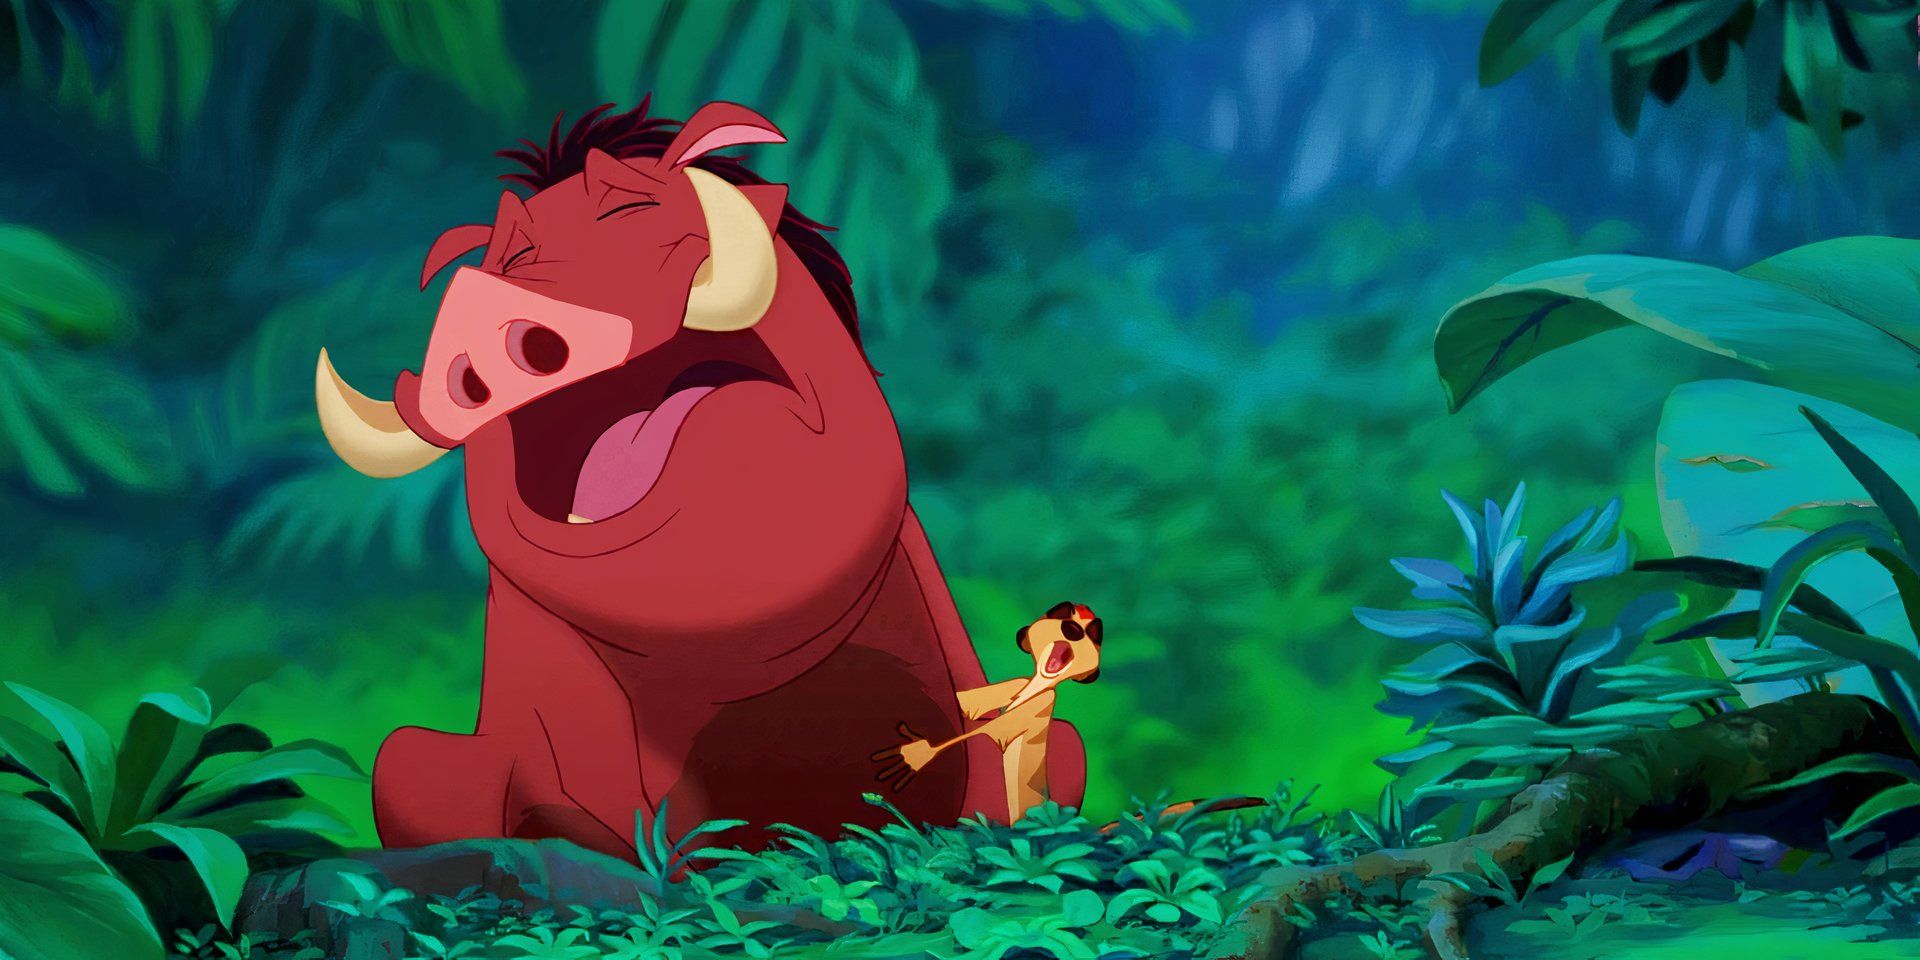 The Lion King Pumbaa and Timon singing dramatically